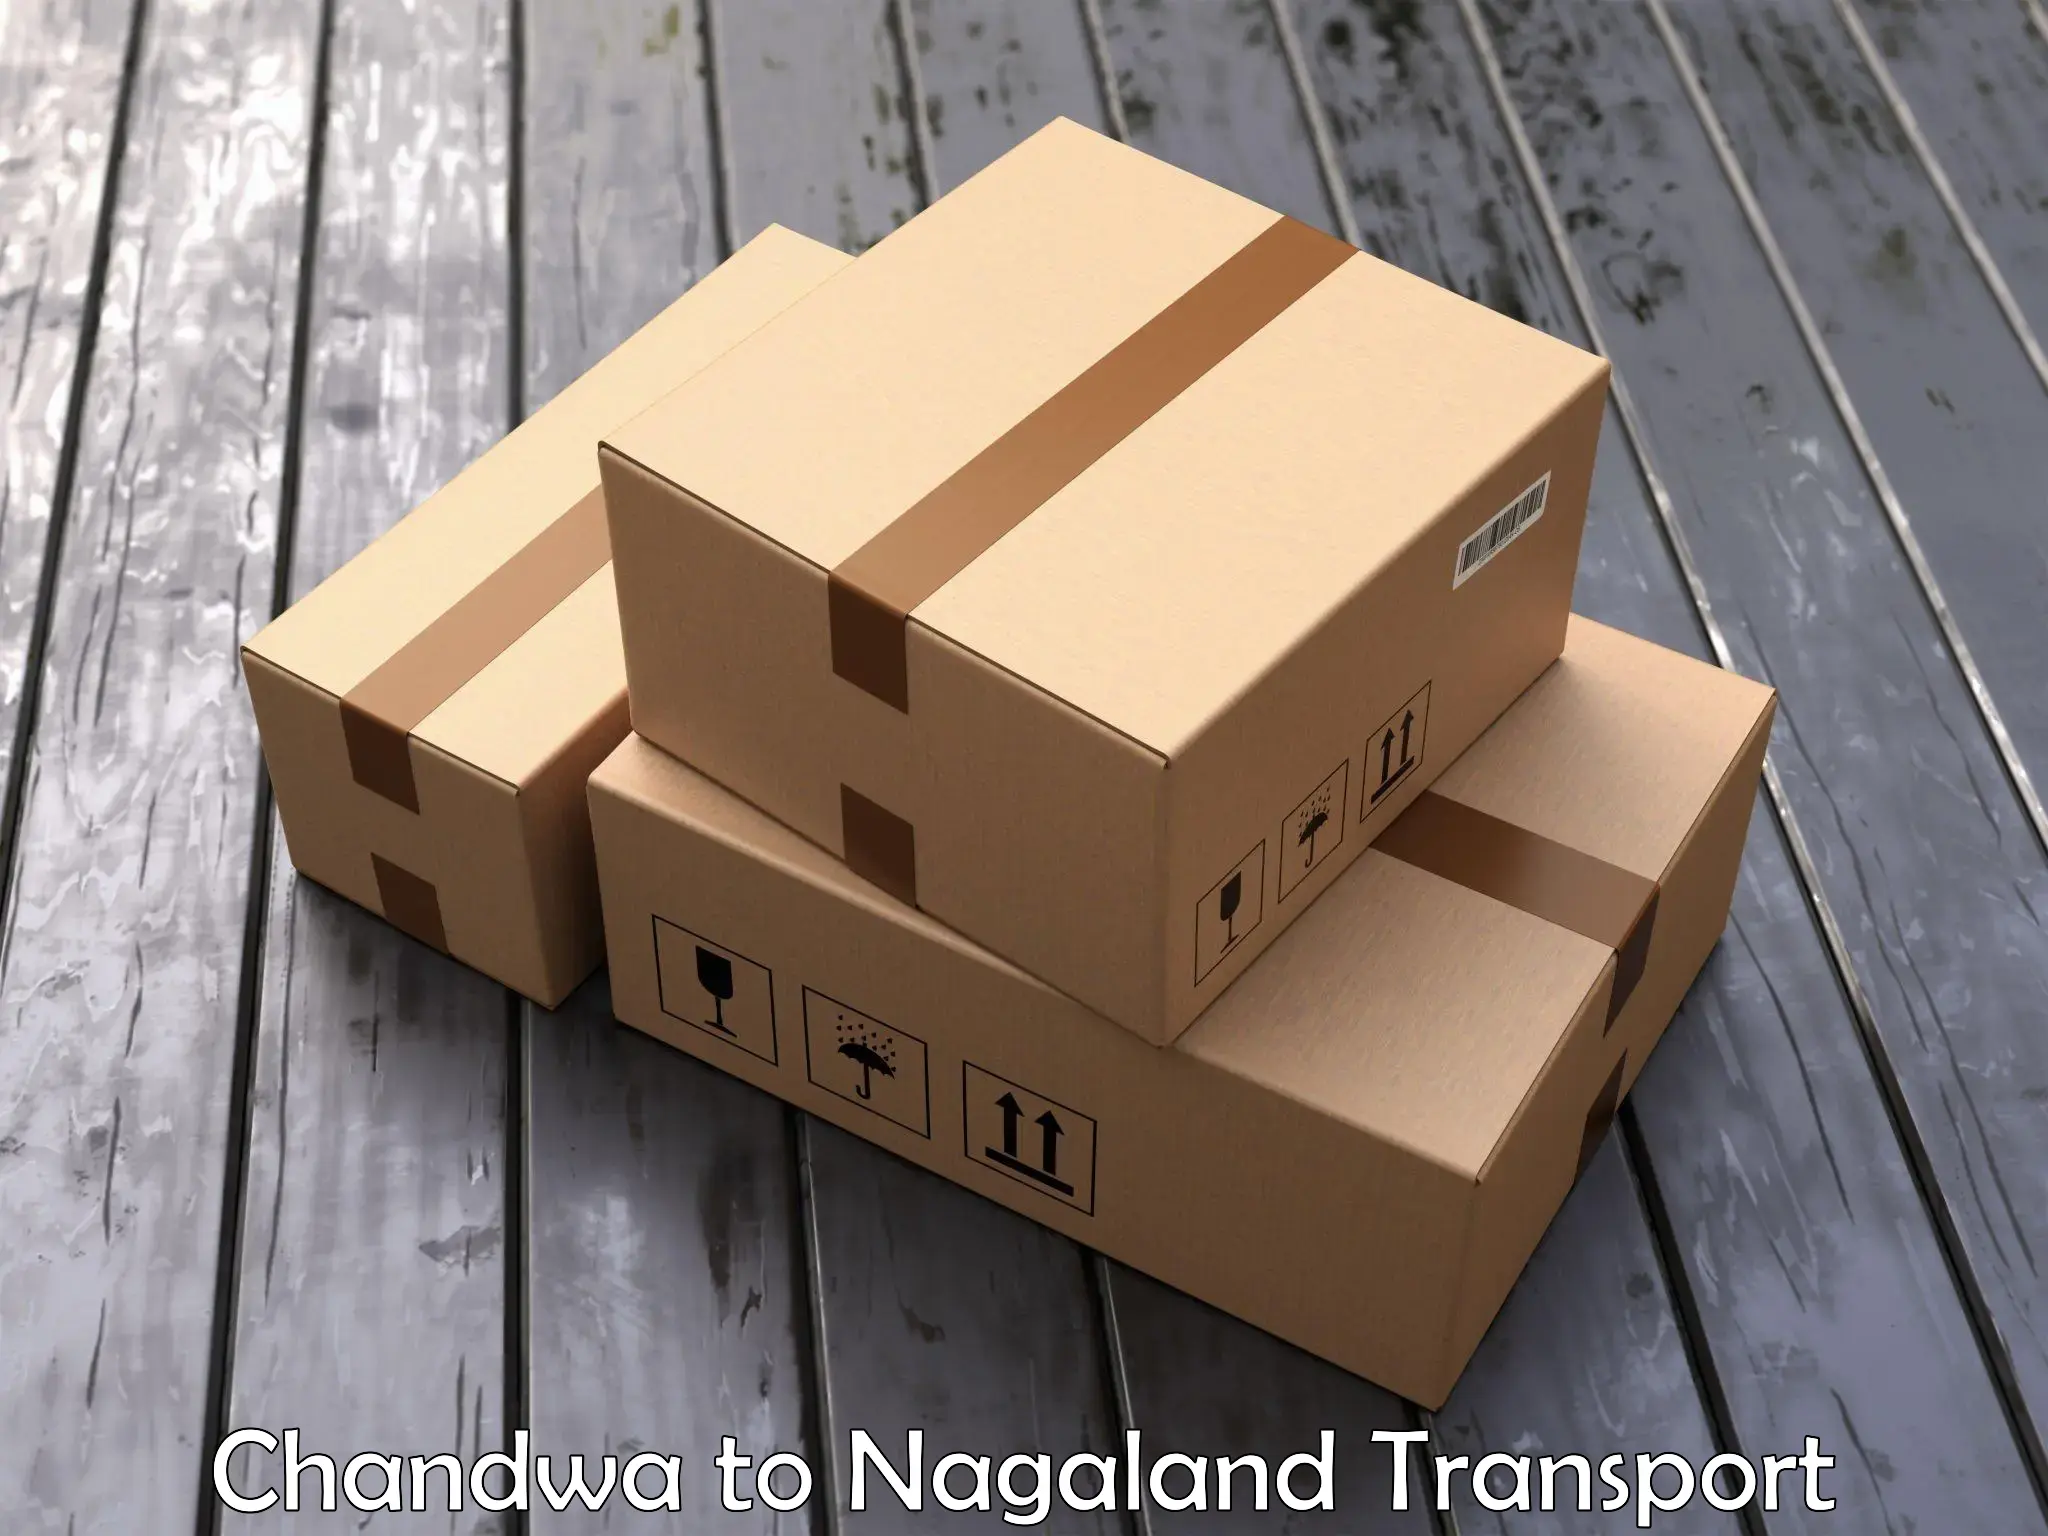 Truck transport companies in India Chandwa to Nagaland